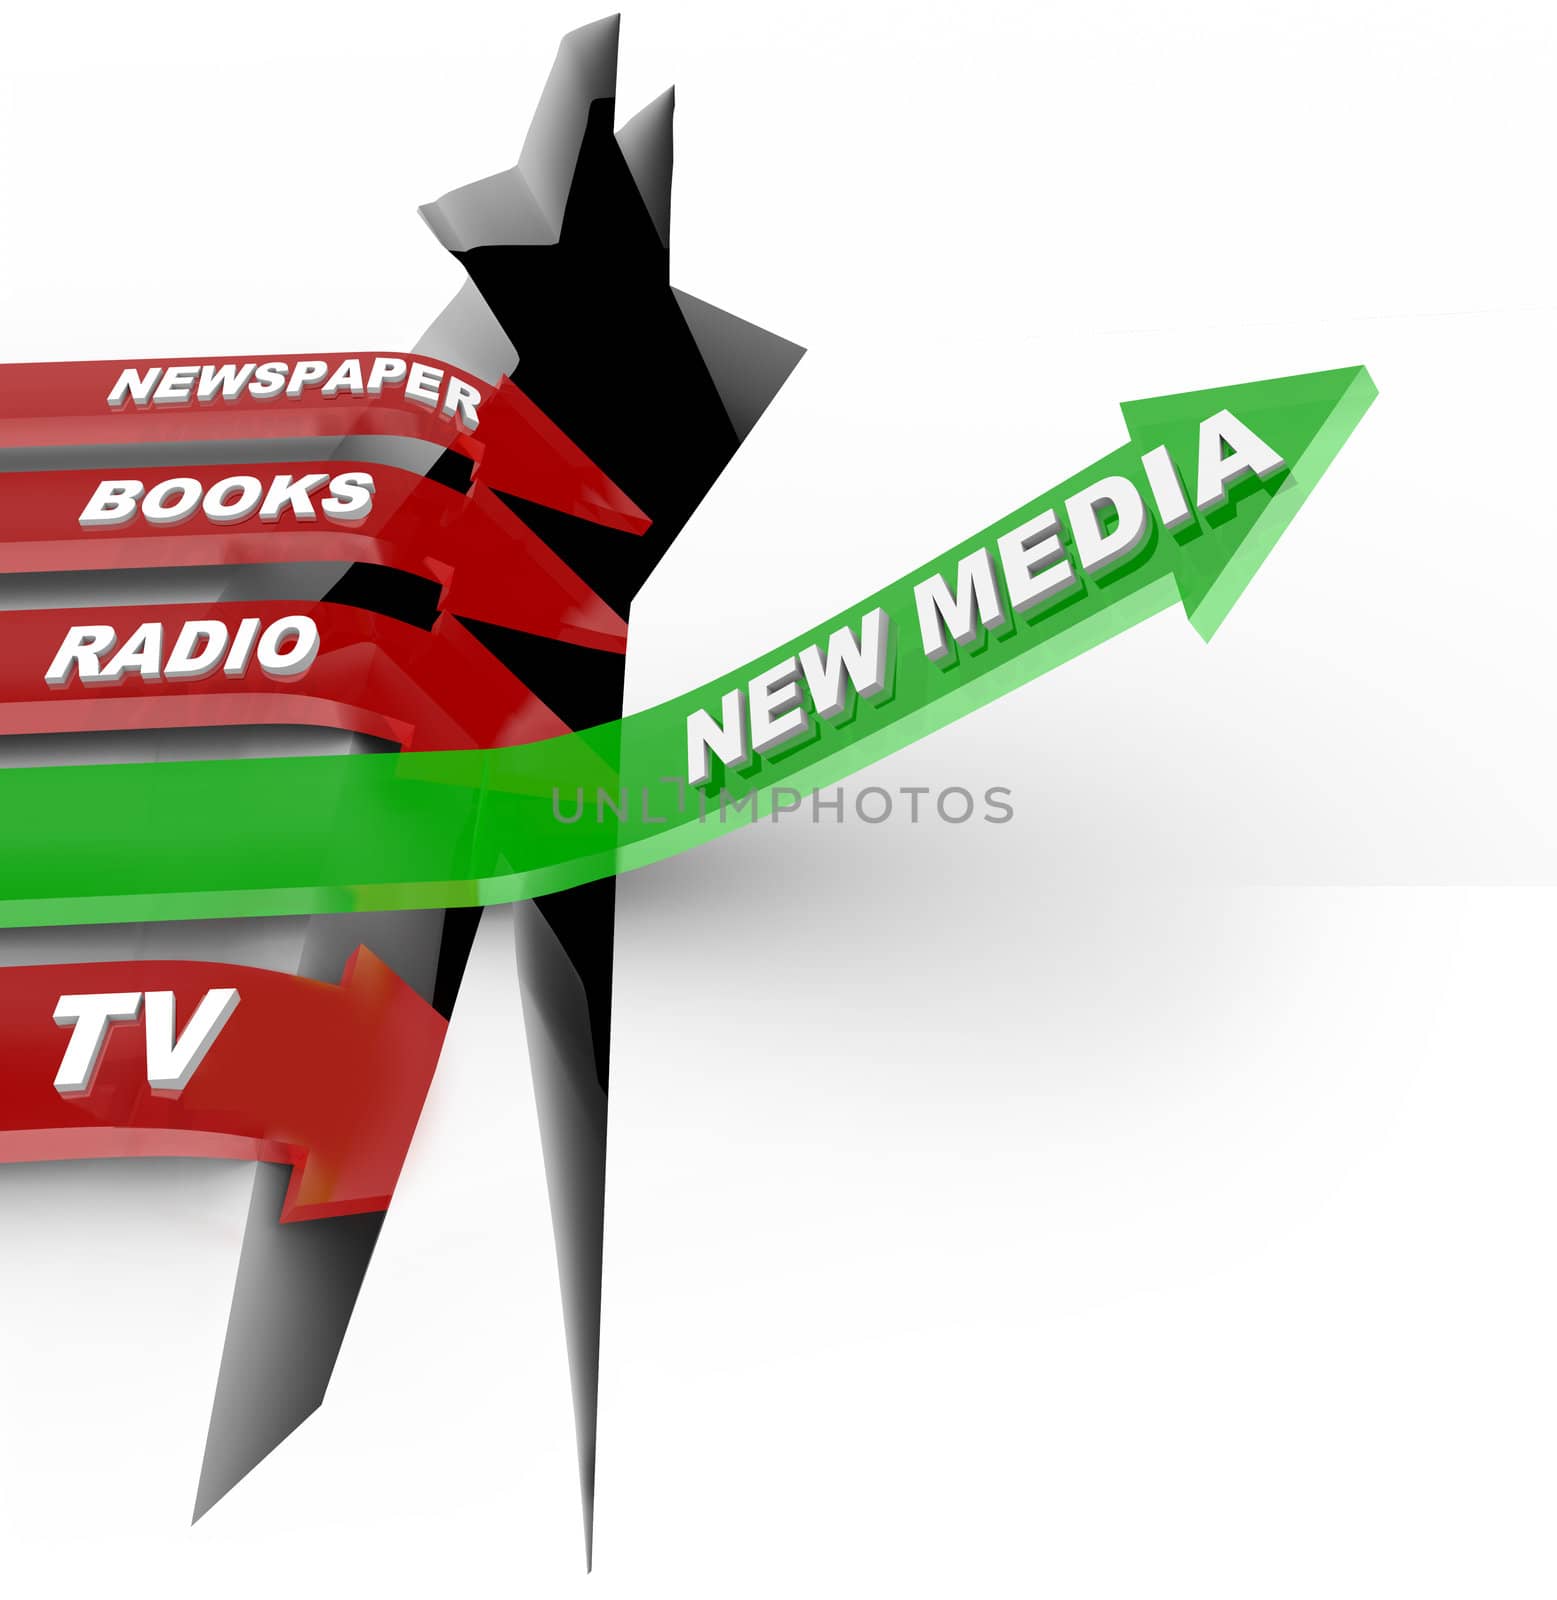 One green arrow marked New Media succeeds in jumping over a crack while the others, marked Newspaper, Books, Radio and TV -- plunge, representing the decrease in these forms of information